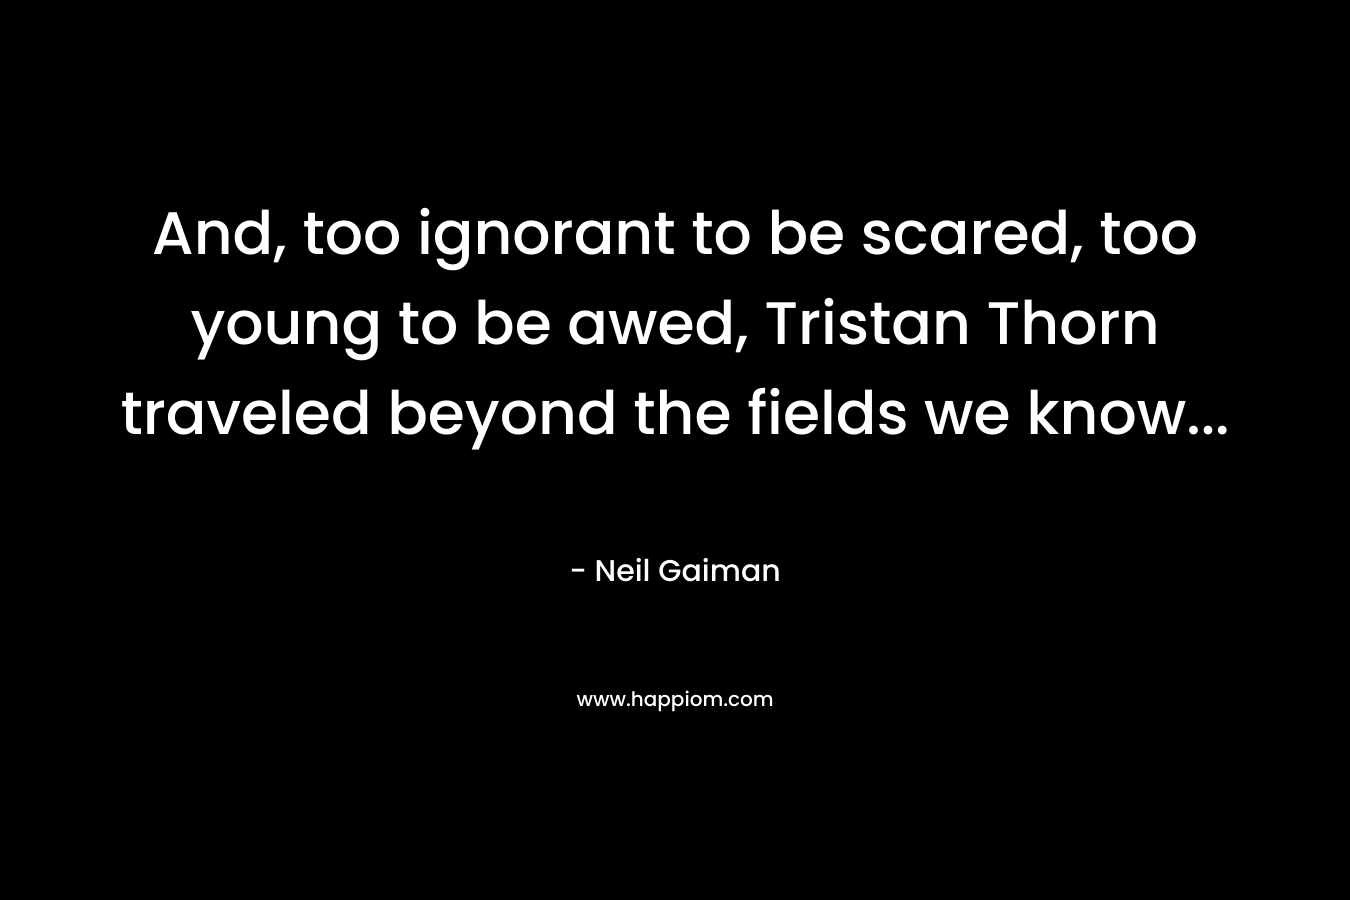 And, too ignorant to be scared, too young to be awed, Tristan Thorn traveled beyond the fields we know… – Neil Gaiman